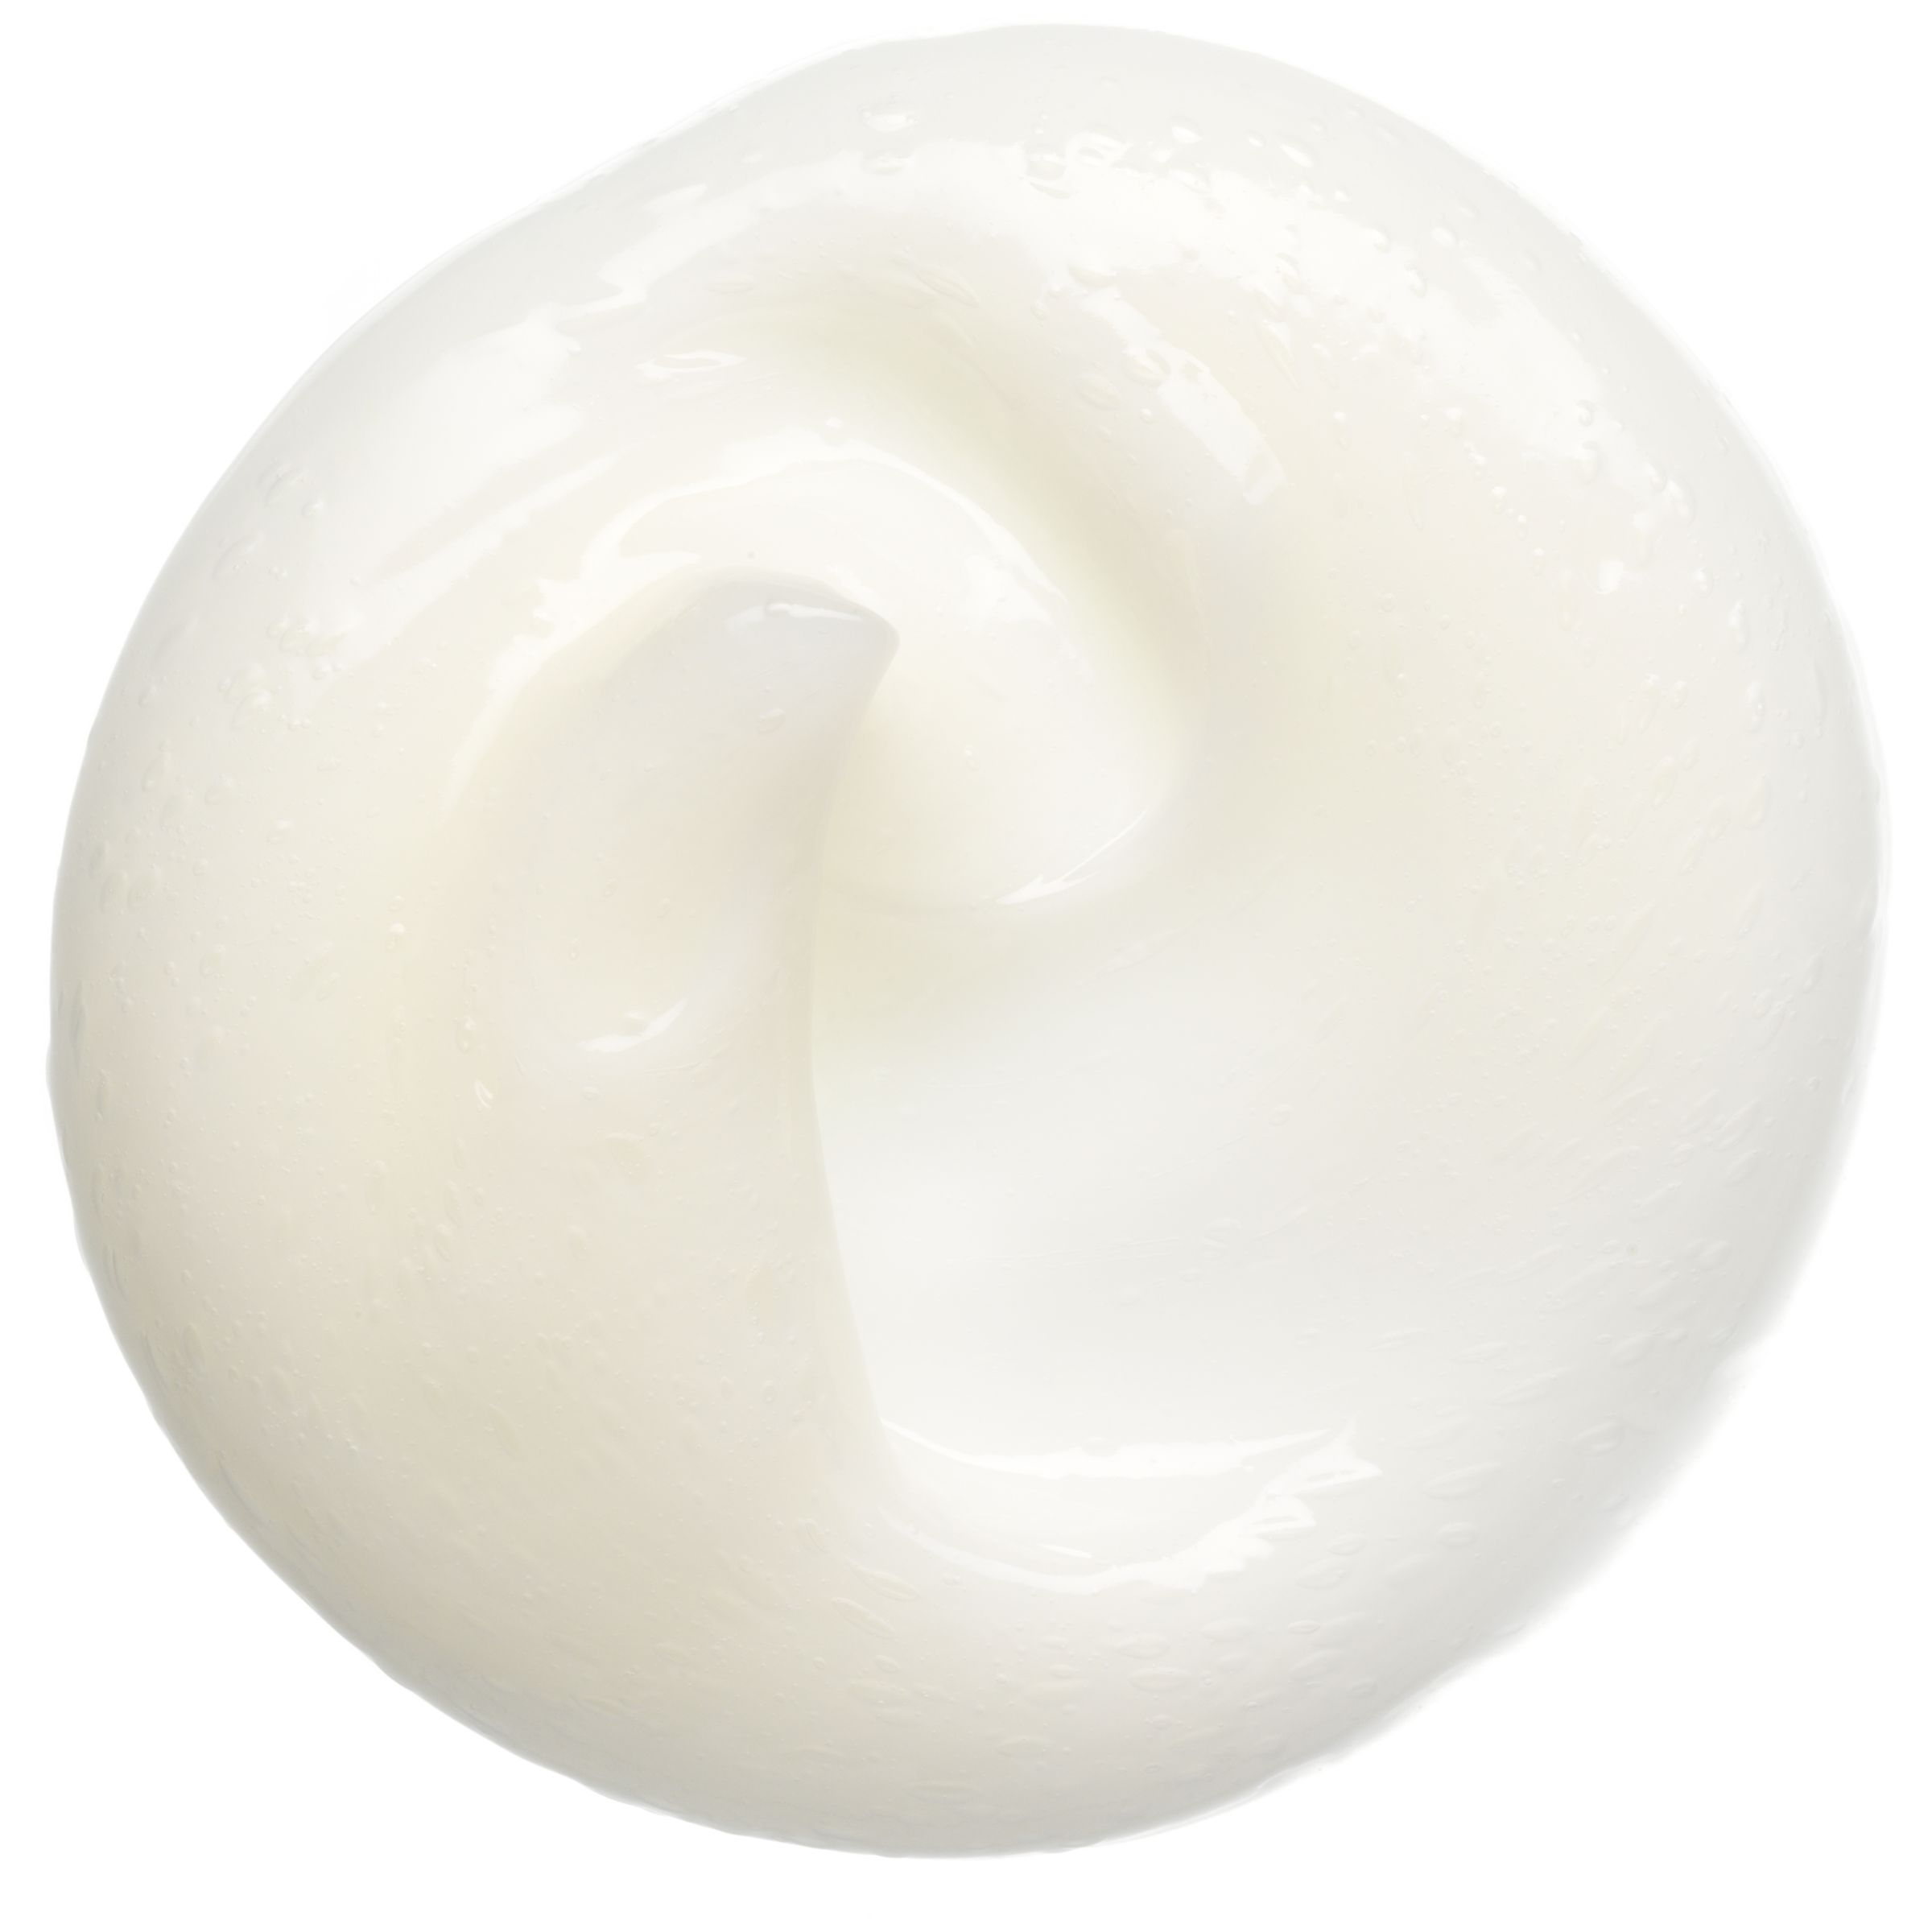 Bumble and bumble Creme De Coco Conditioner, 250ml at John Lewis & Partners